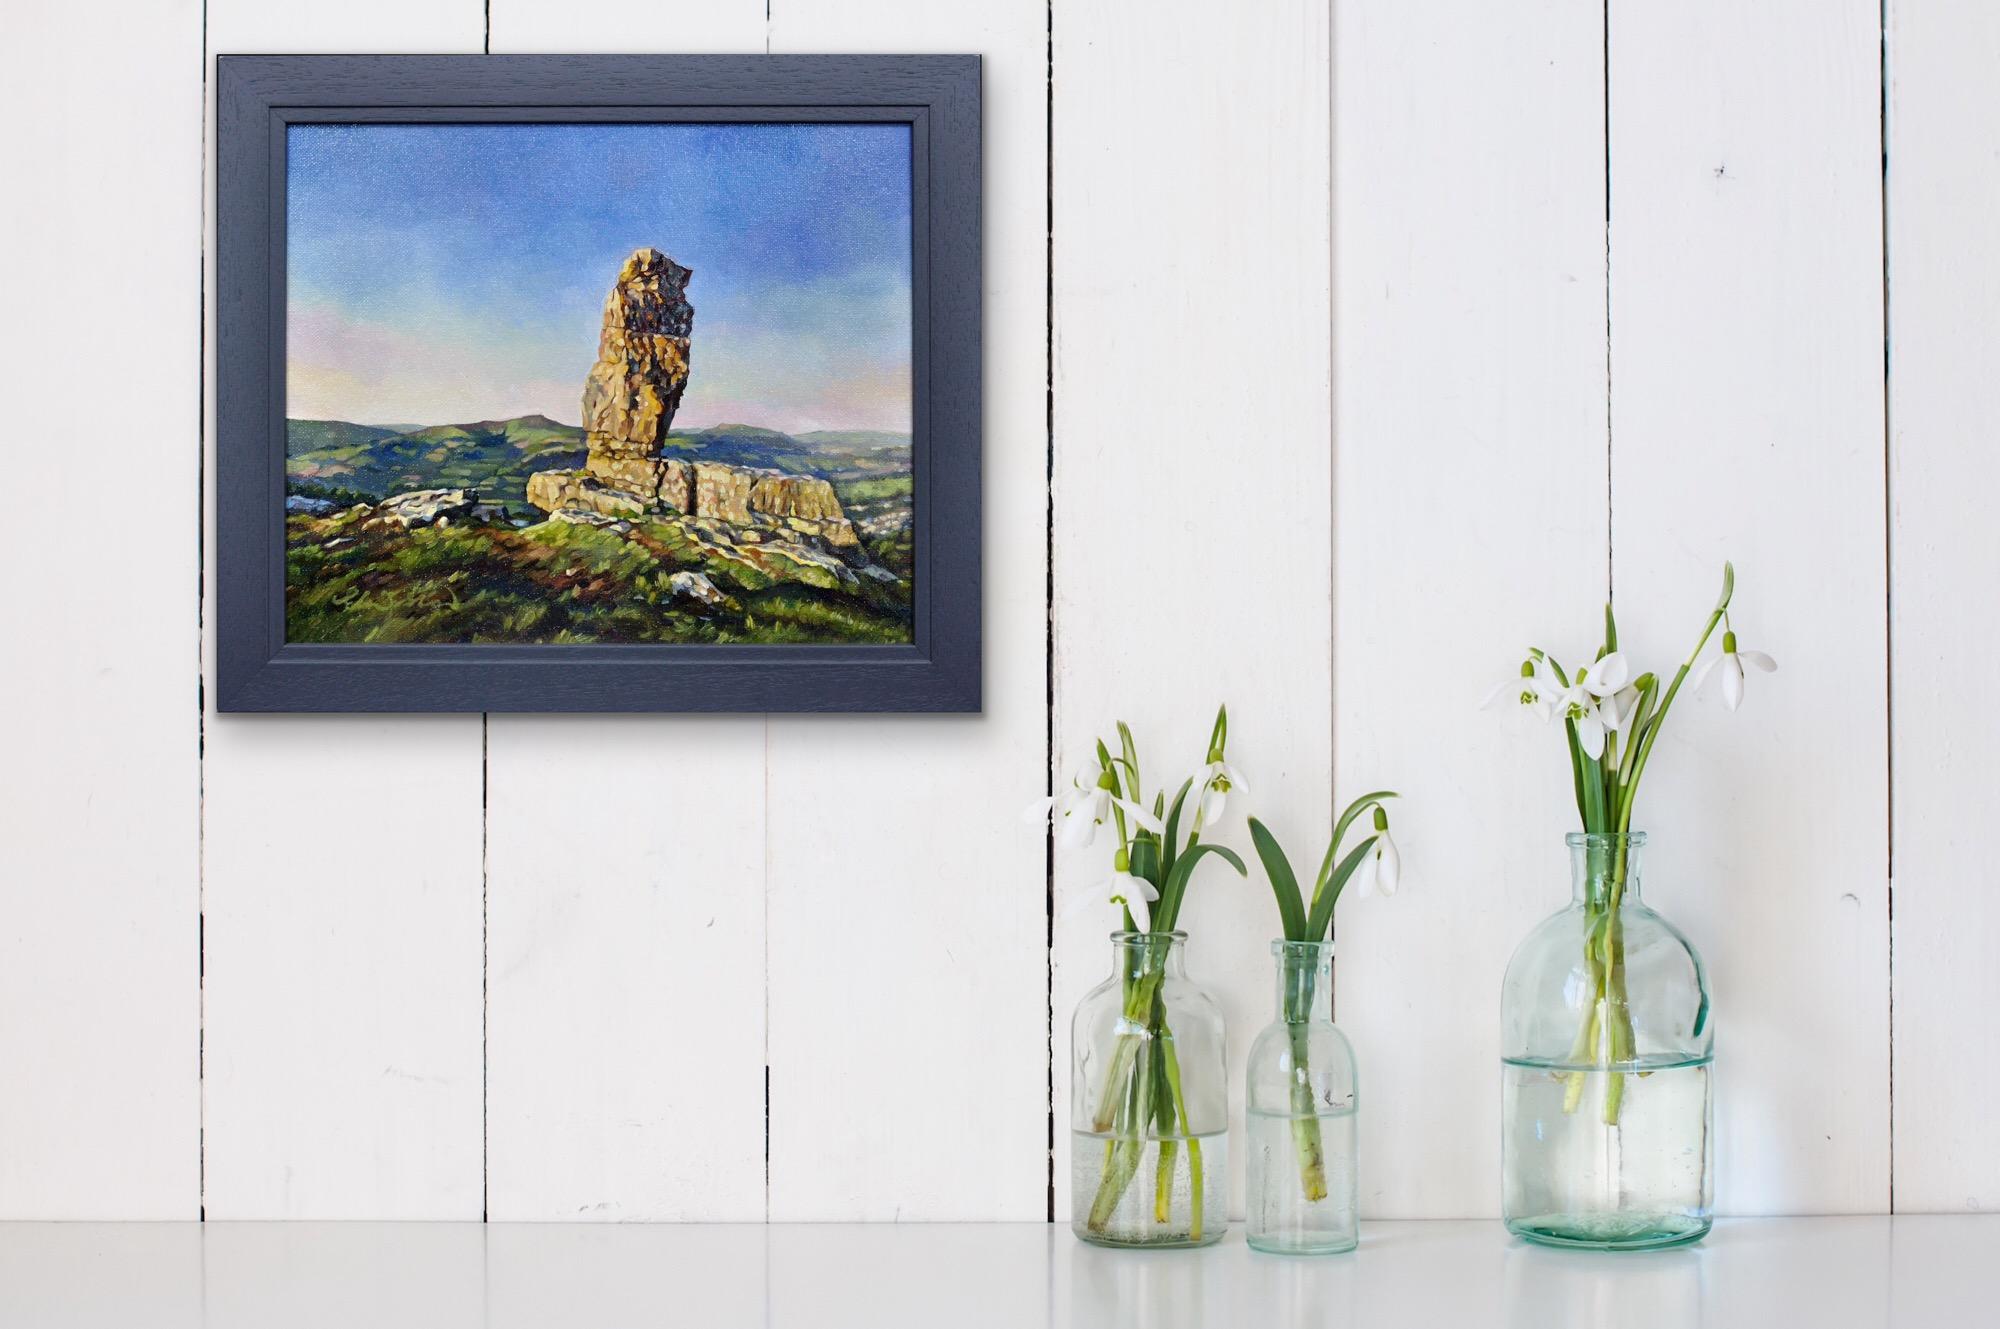 Y Bugail Unig (The Lonely Shepherd), Llangattock, Brecon Beacons. Welsh Folklore For Sale 12